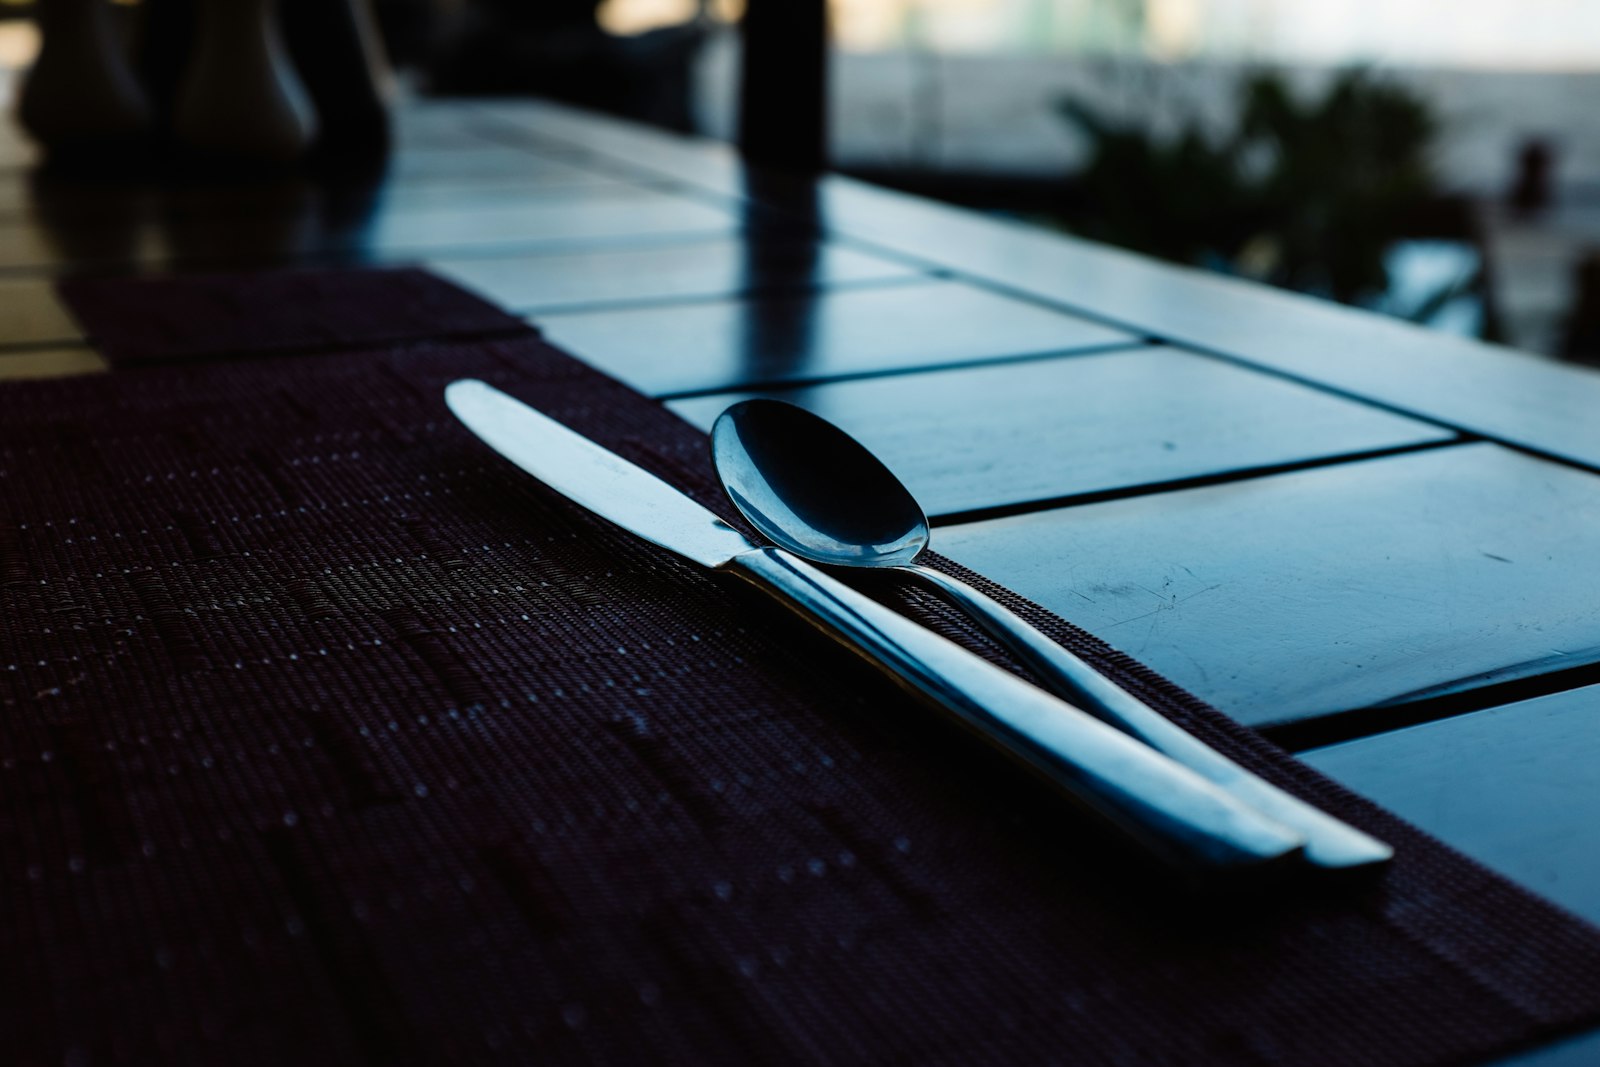 Fujifilm X100S sample photo. Two stainless steel spoon photography